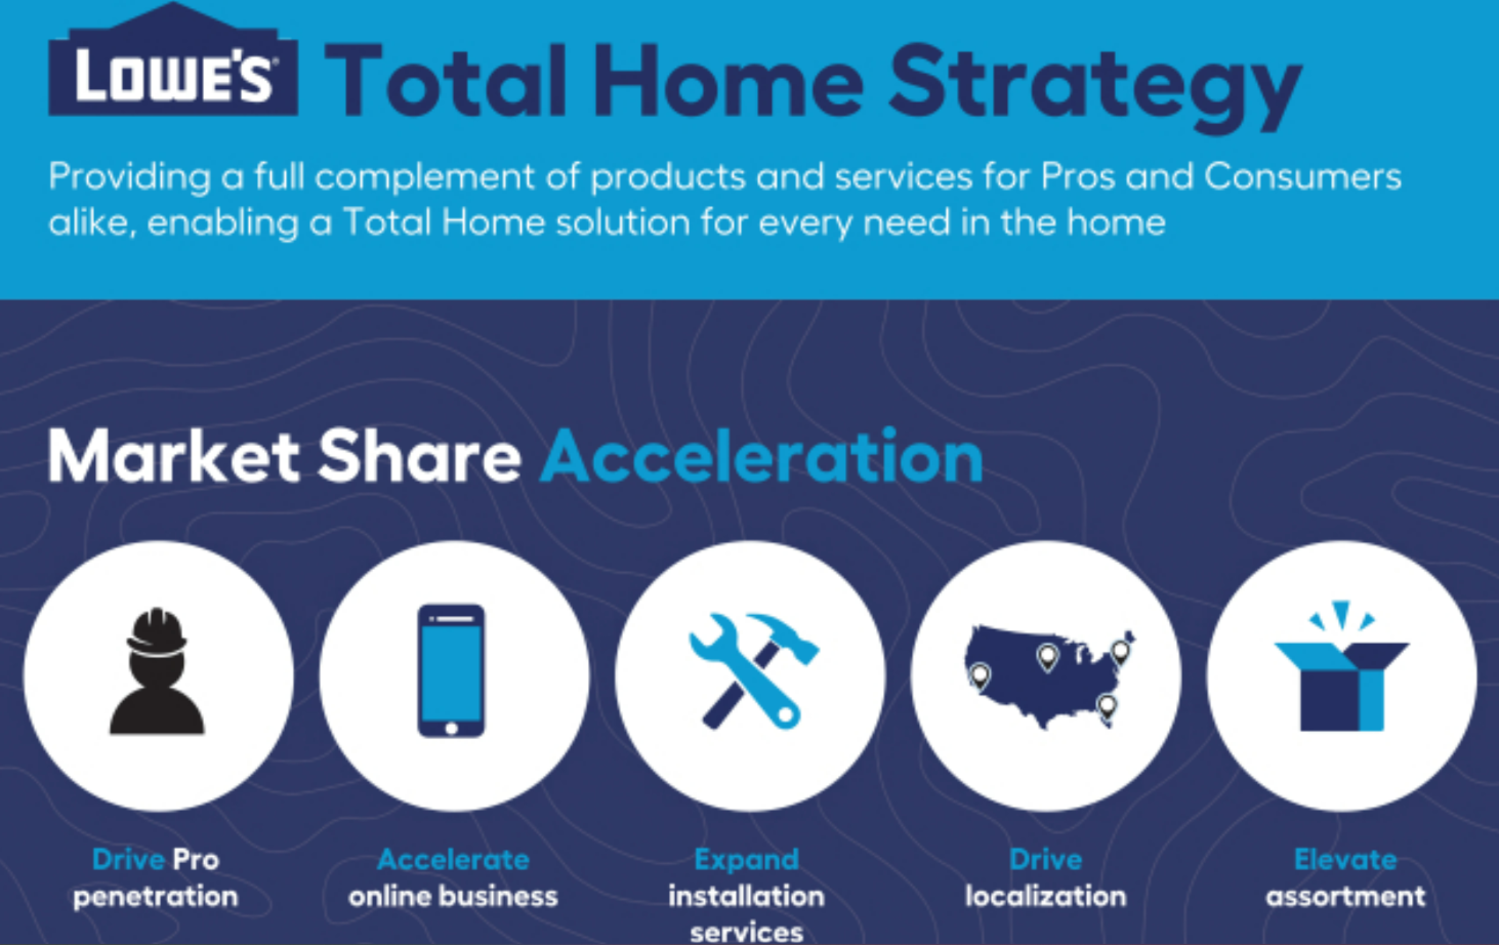 Lowes Total Home strategy